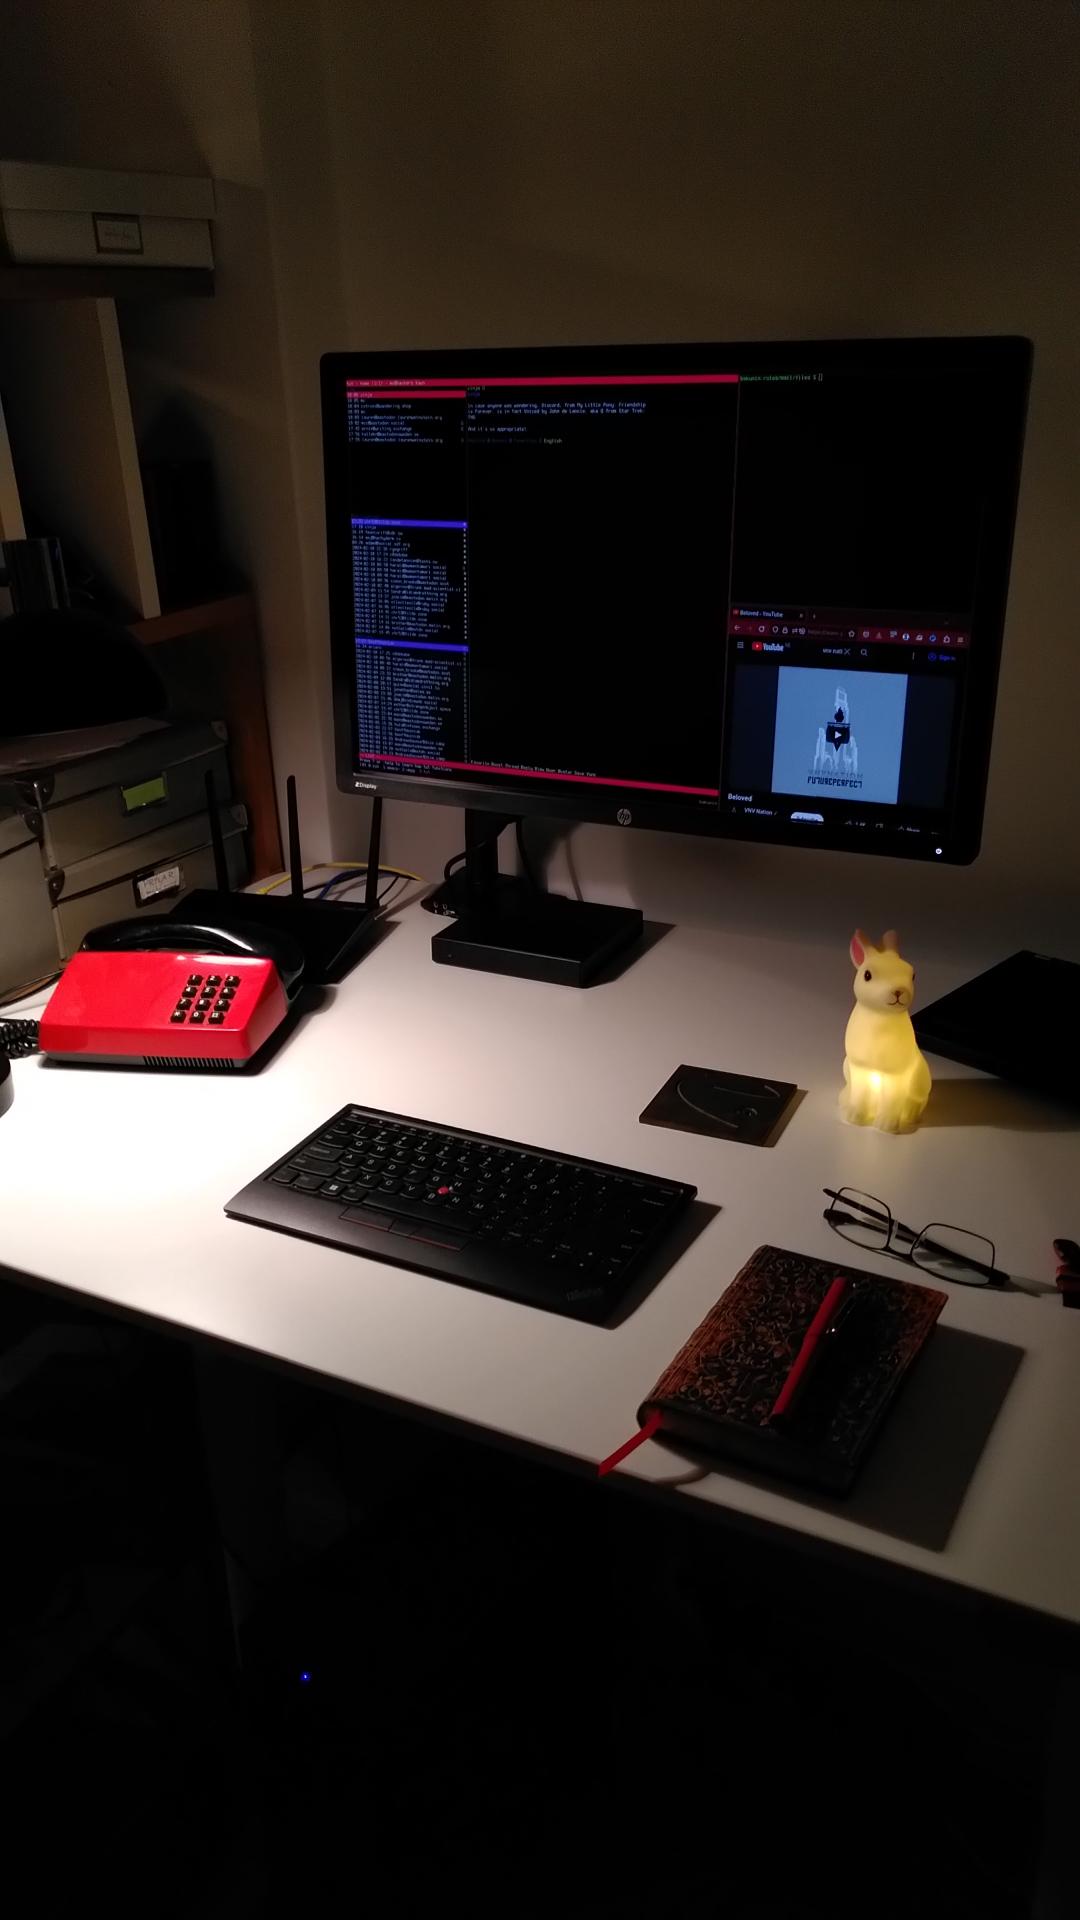 Small white desk with a red/black classical touchtone phone, a 24" monitor on an arm, a small lit bunny children's light, a fancy notebook with a pen, a pair of glasses